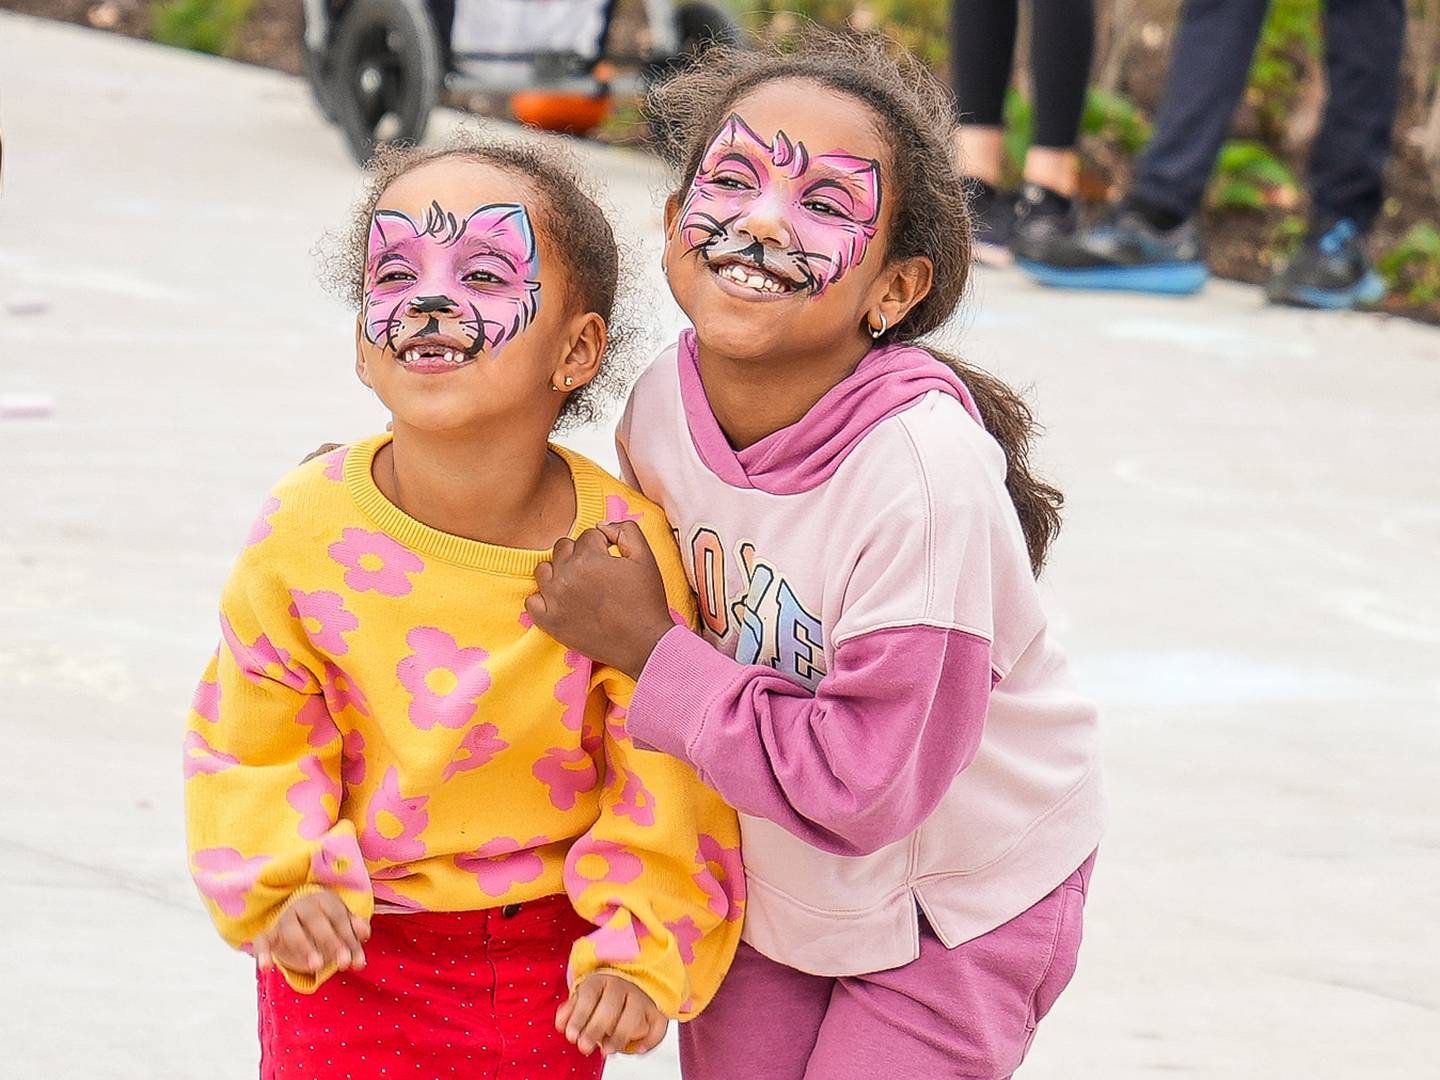 Emamda Tesfa (6) in pink and Meheret Yosias (4) in yellow take a photo in their freshly applied face paint.